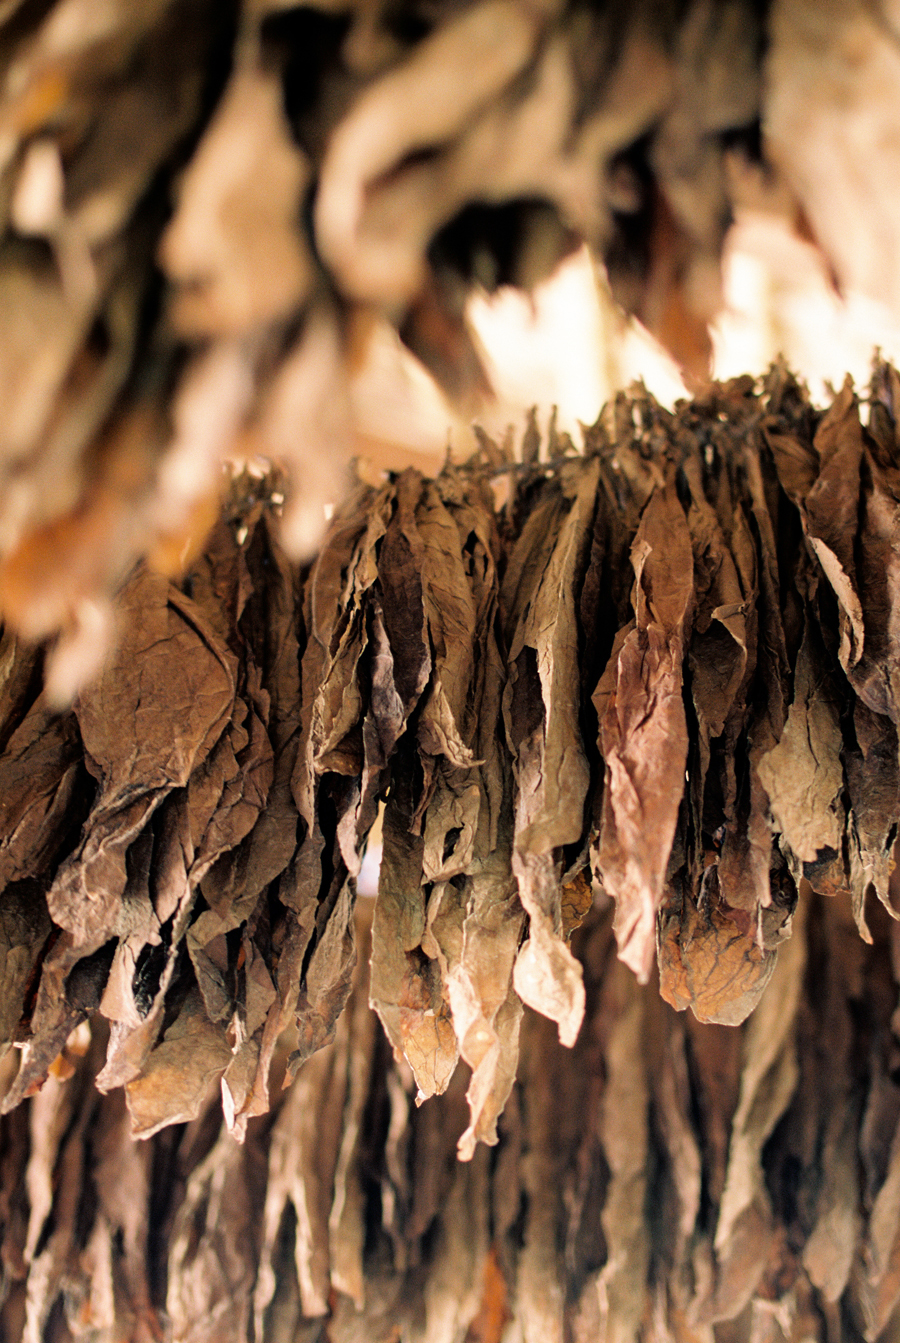 Drying Tobacco Leaves in the Dominican Republic